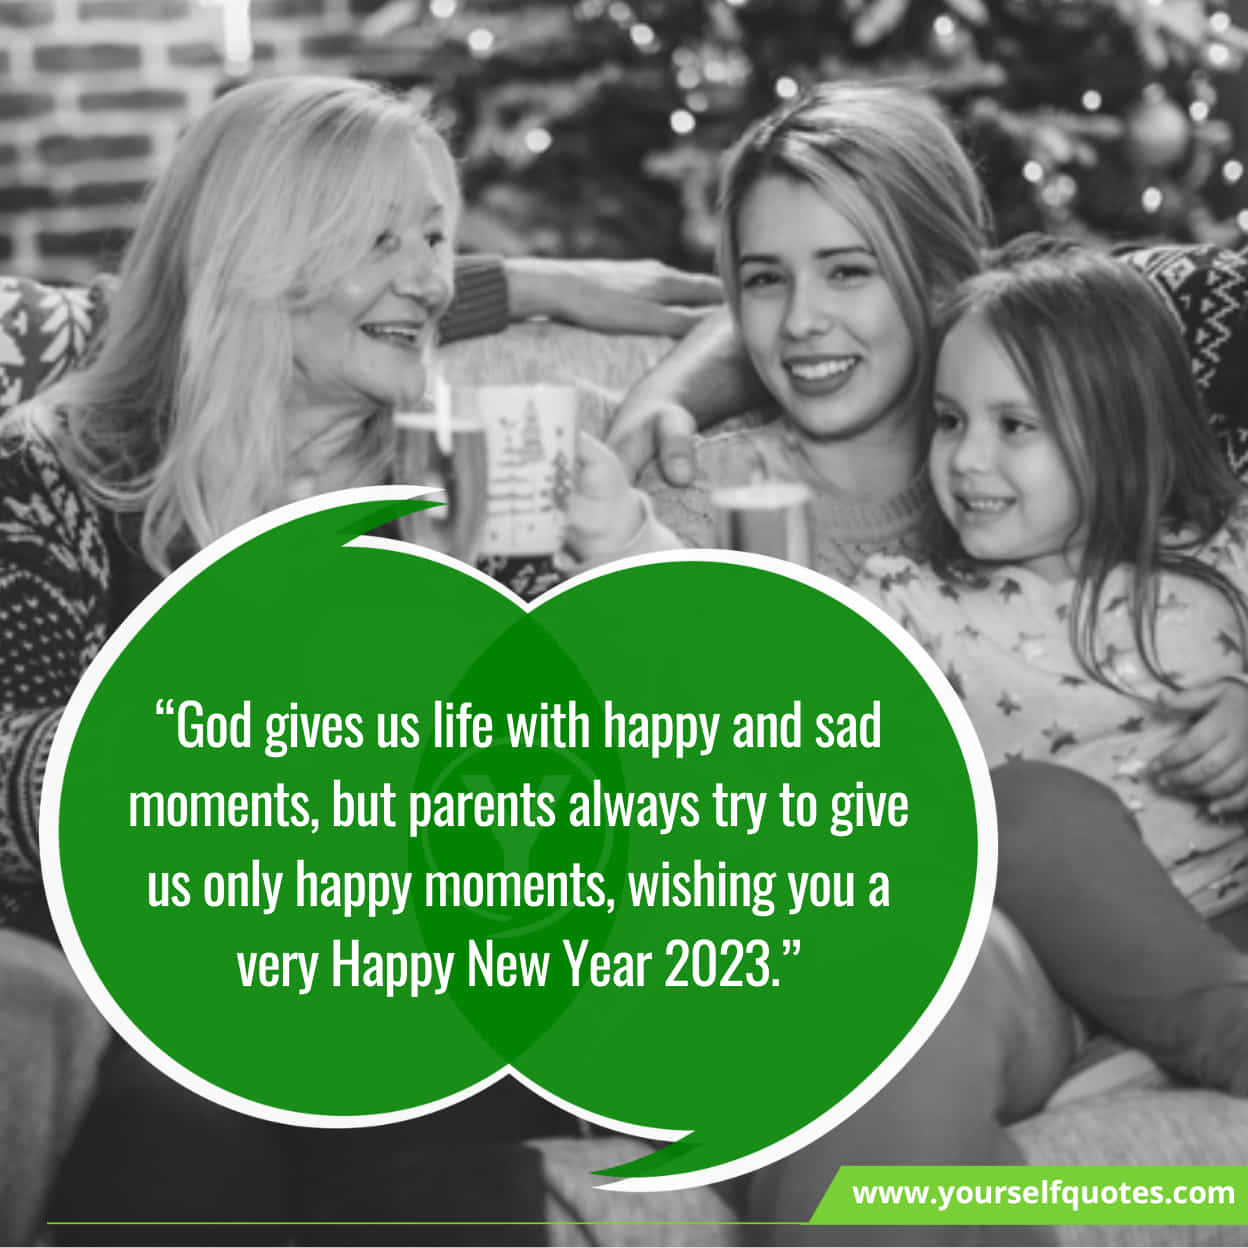 Graceful Wishes On New Year for Parents